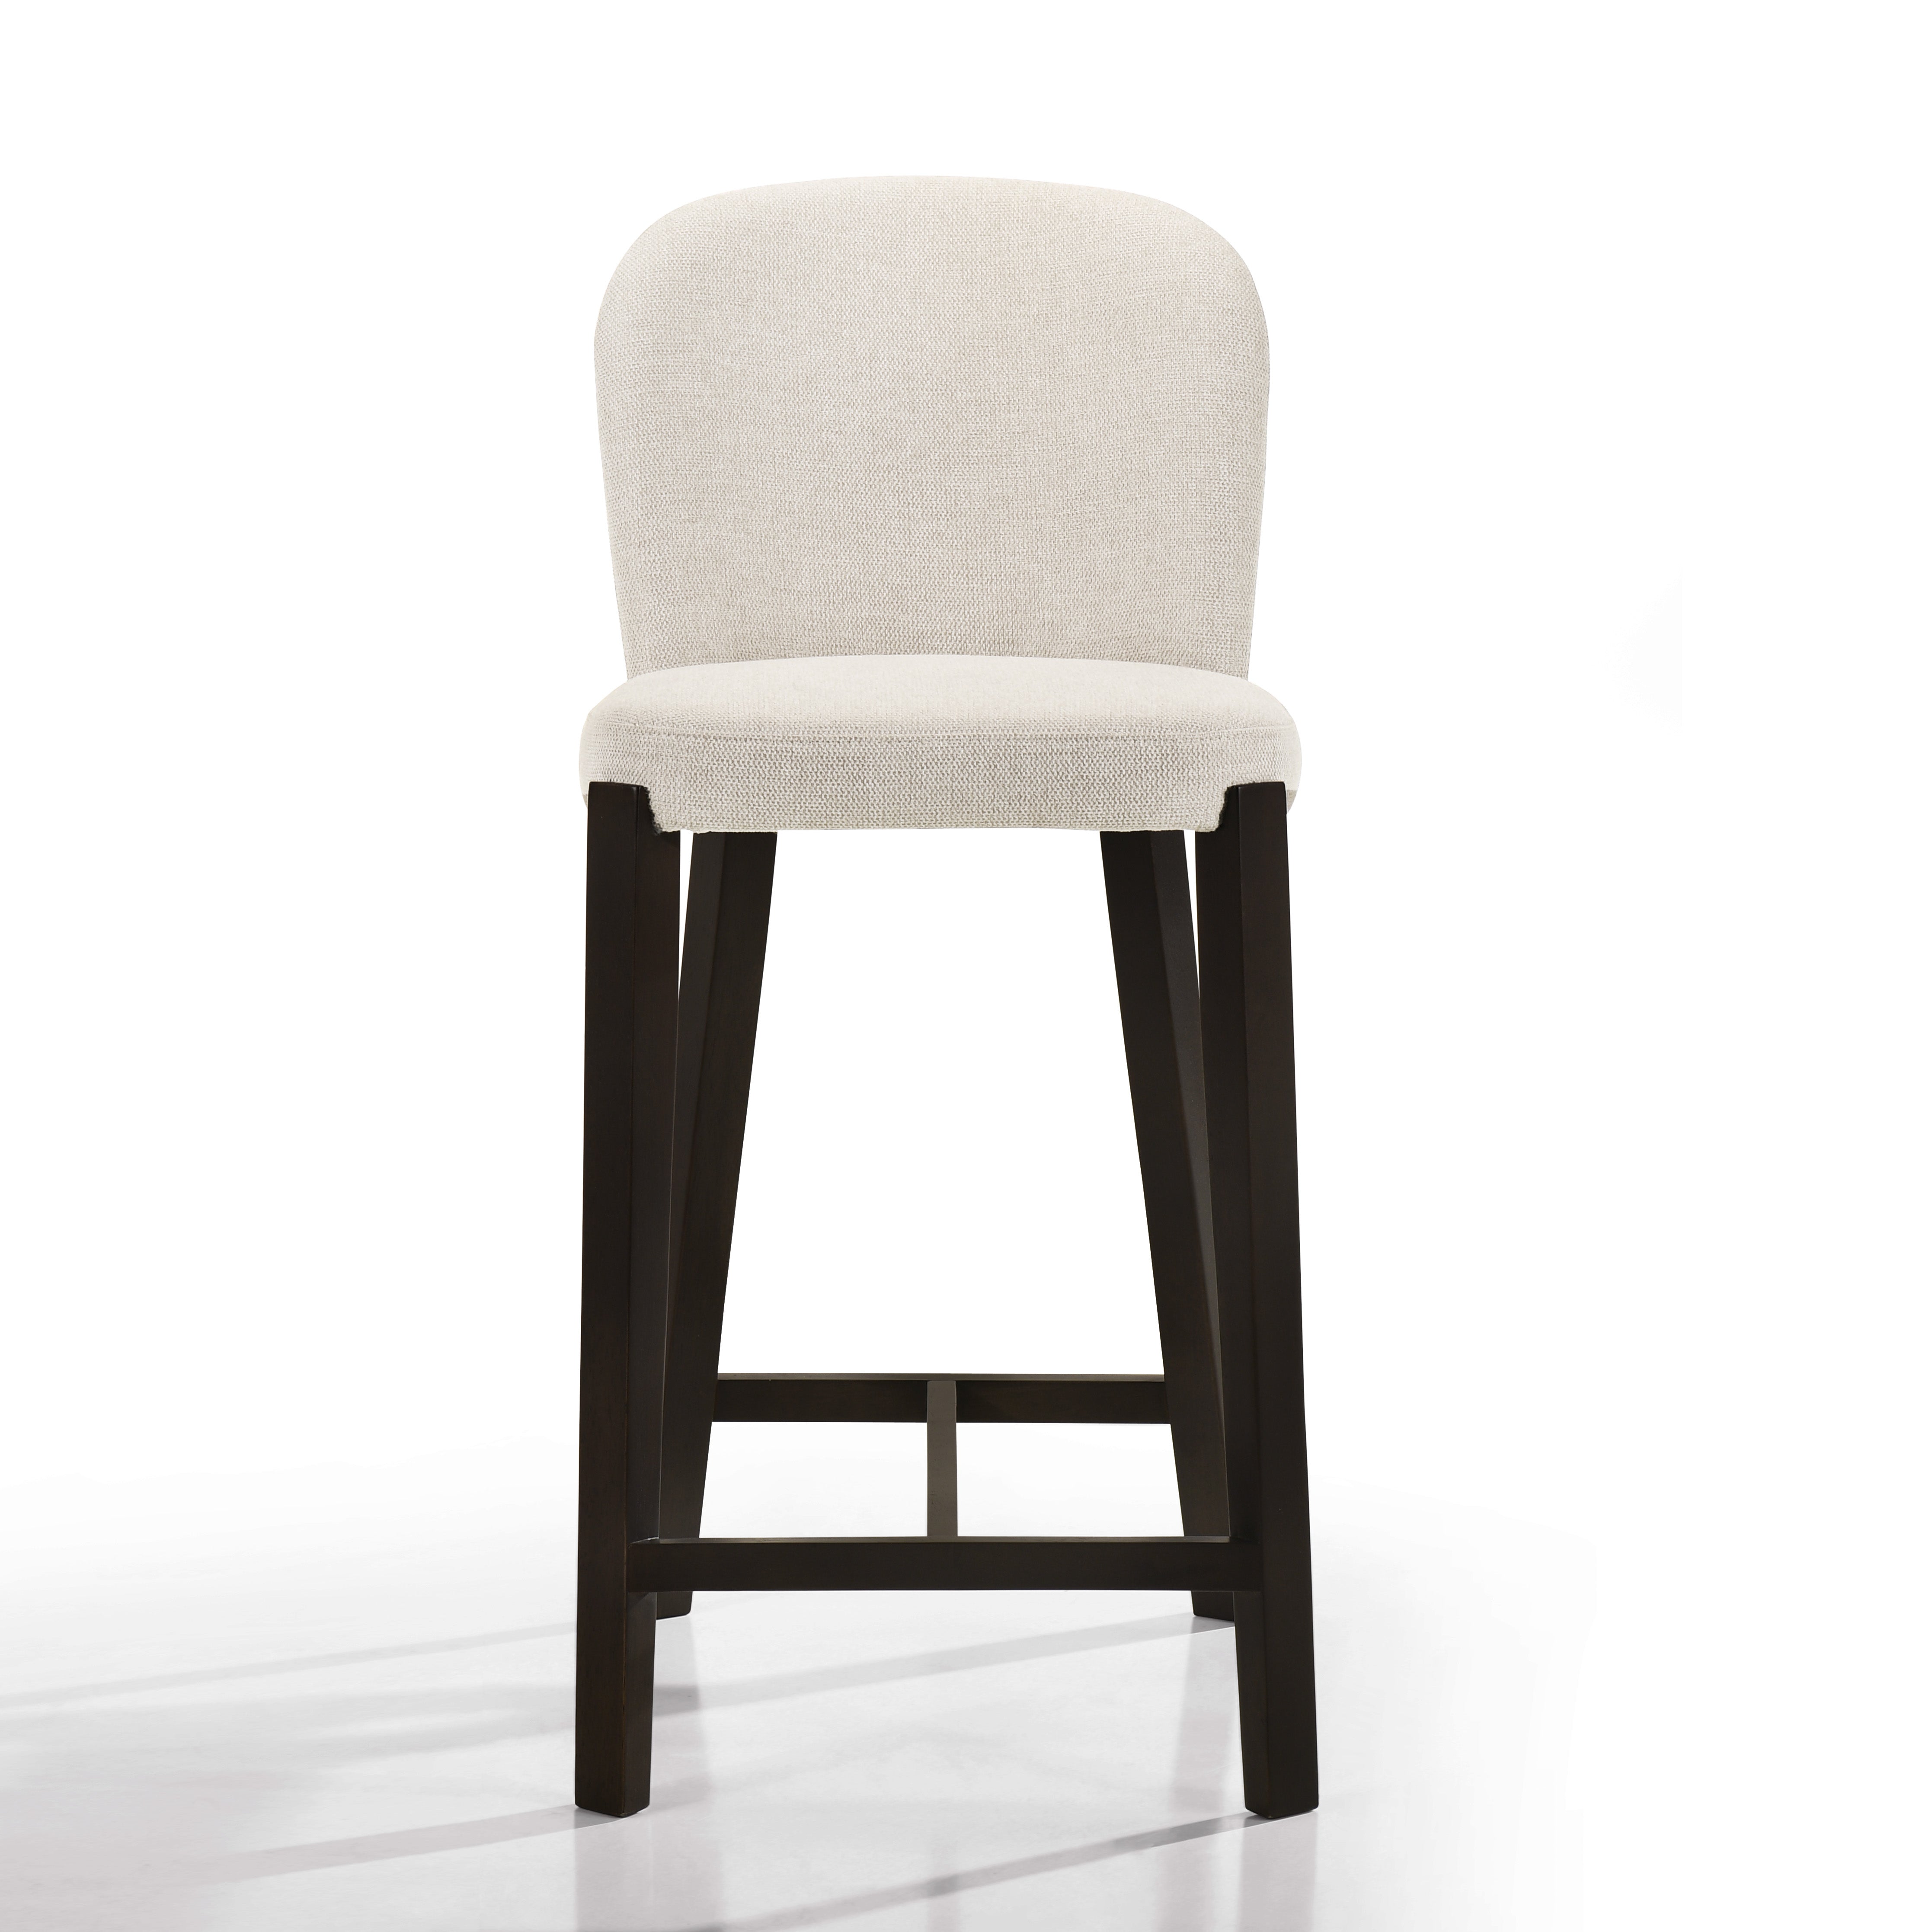 Larsen 26" Solid Wood and Fabric Counter Stool, Oatmeal Beige